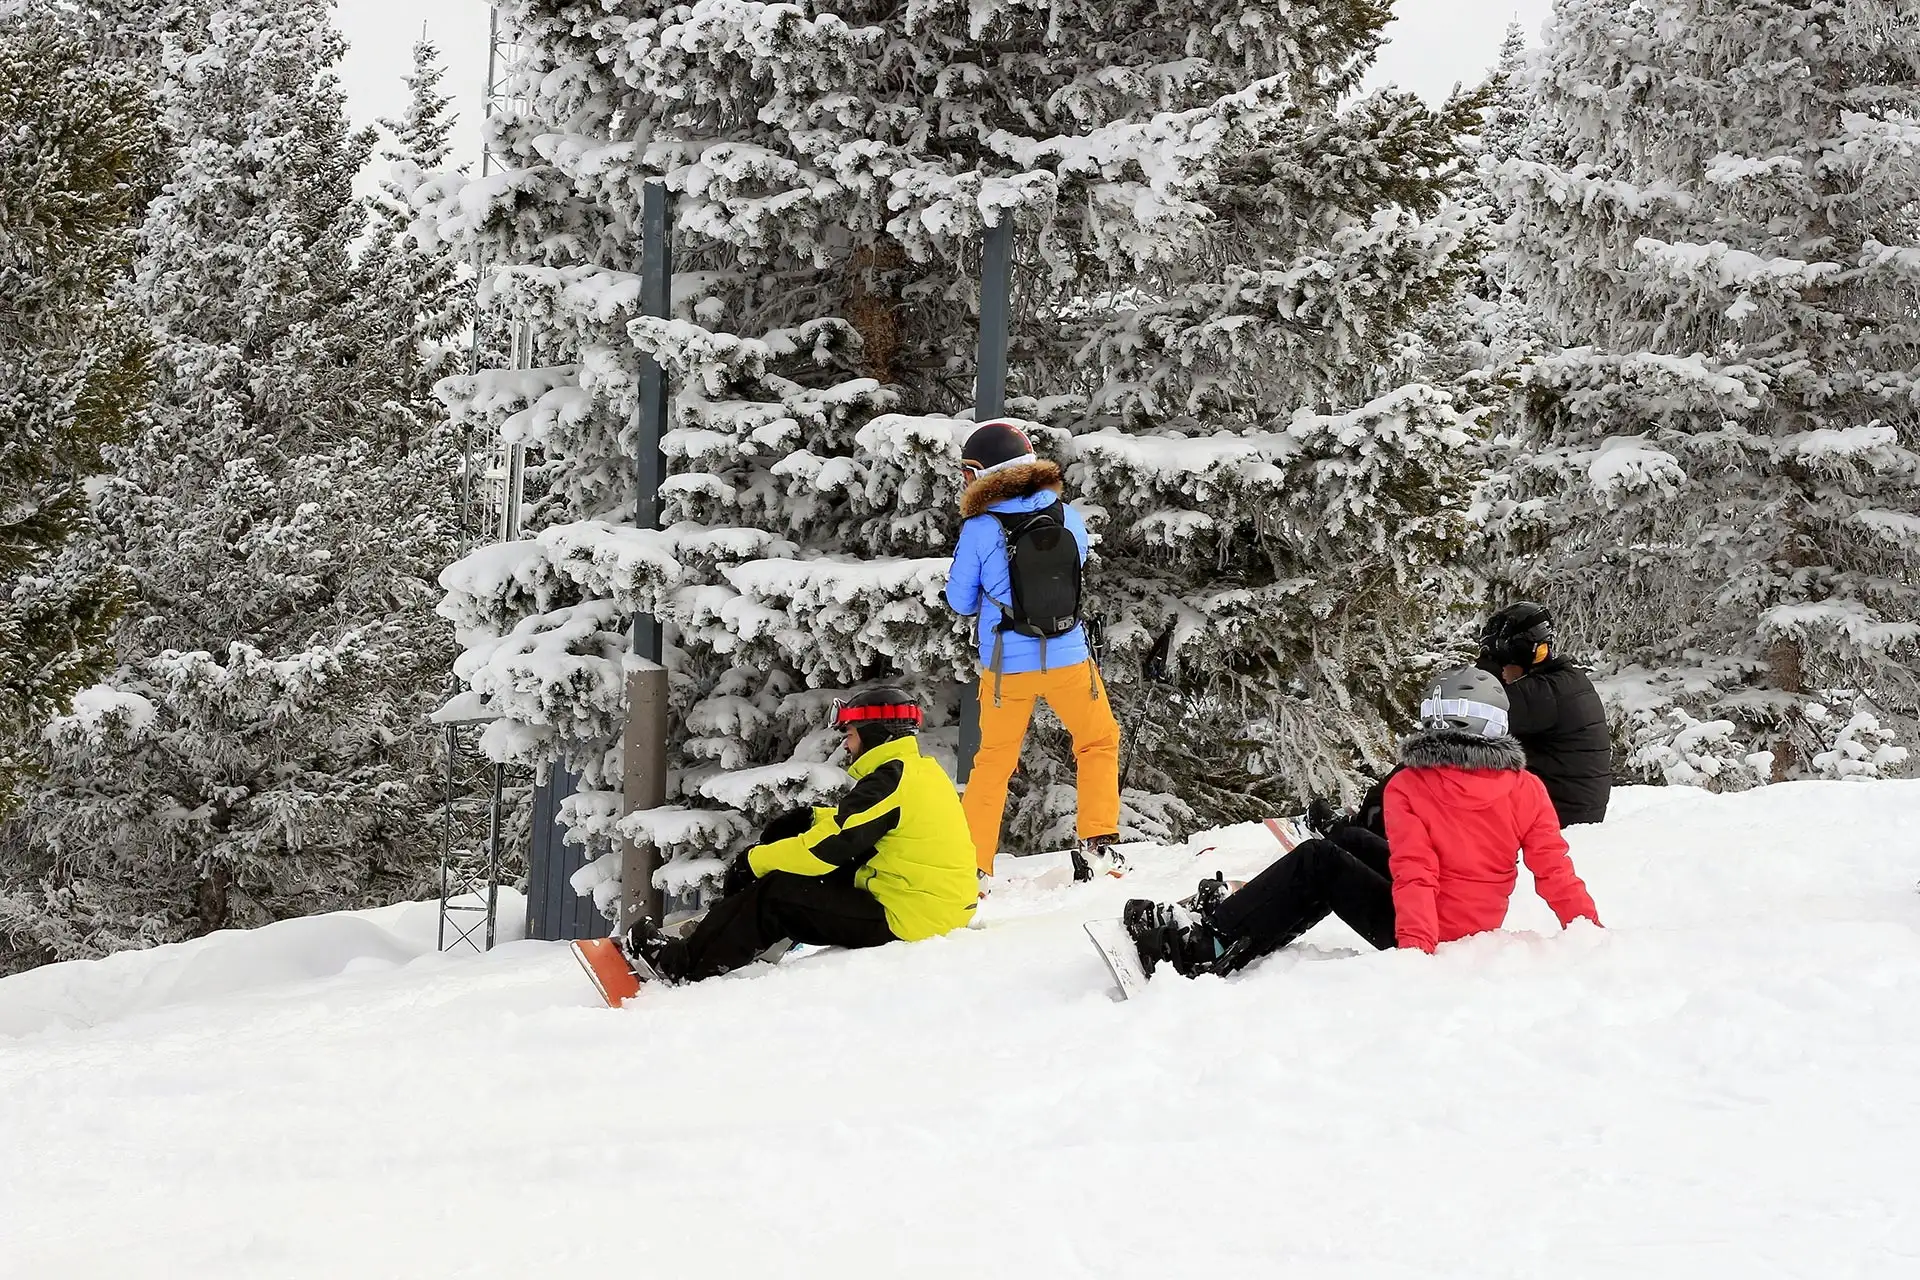 A group of teens taking a break on the mountain at Snowmass in Colorado.